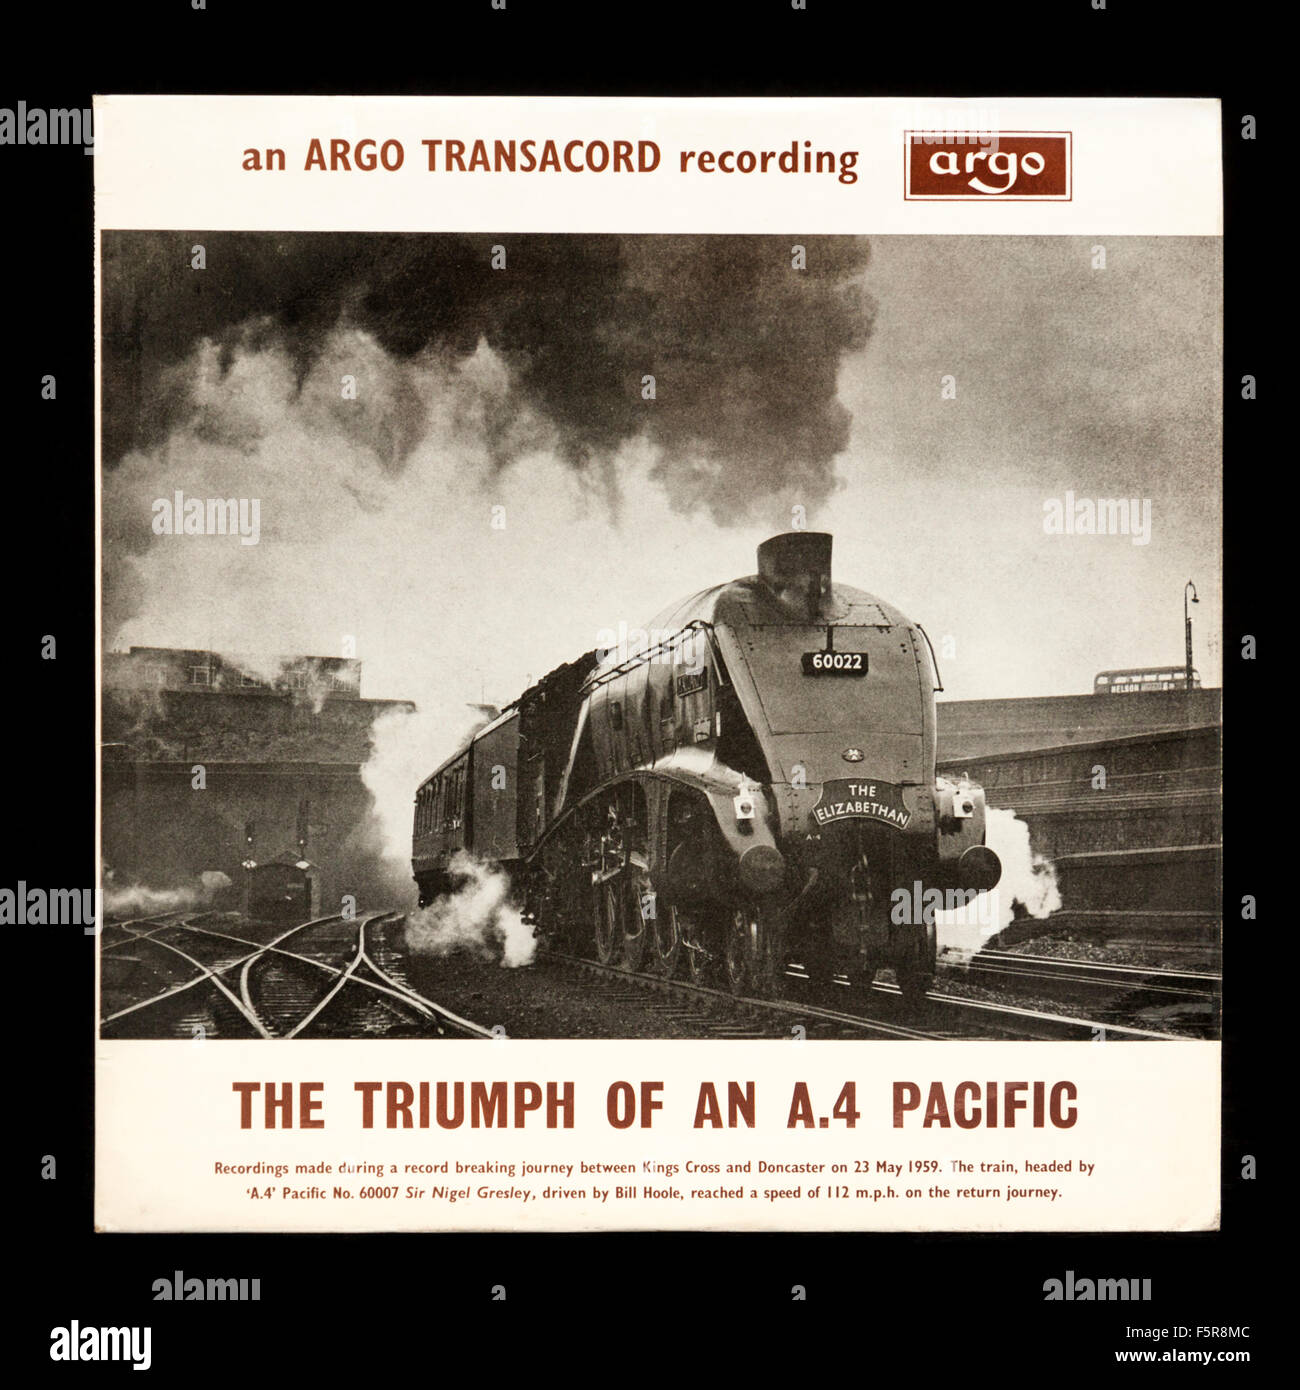 ARGO TRANSACORD recording / LP (ZTR108) of the record breaking journey in 1959 of the A.4 Pacific No 60007 'Sir Nigel Gresley' Stock Photo